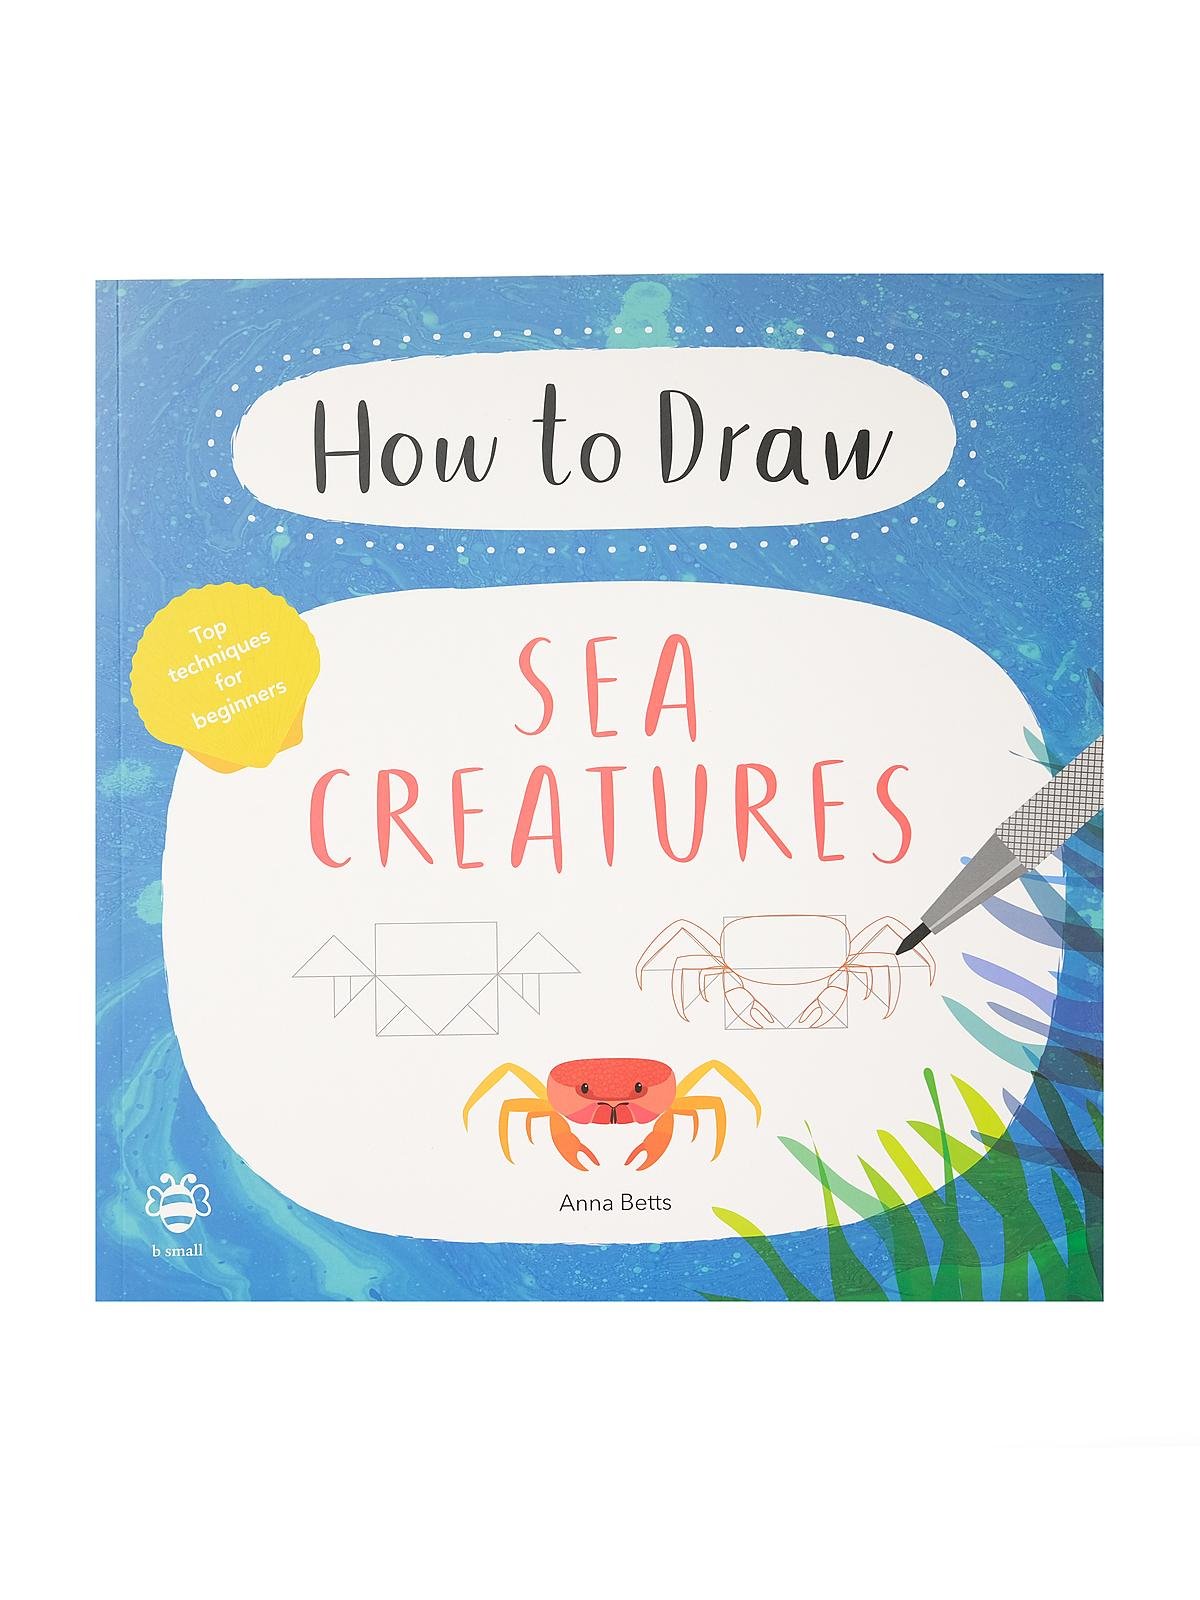 b small publishing - How to Draw